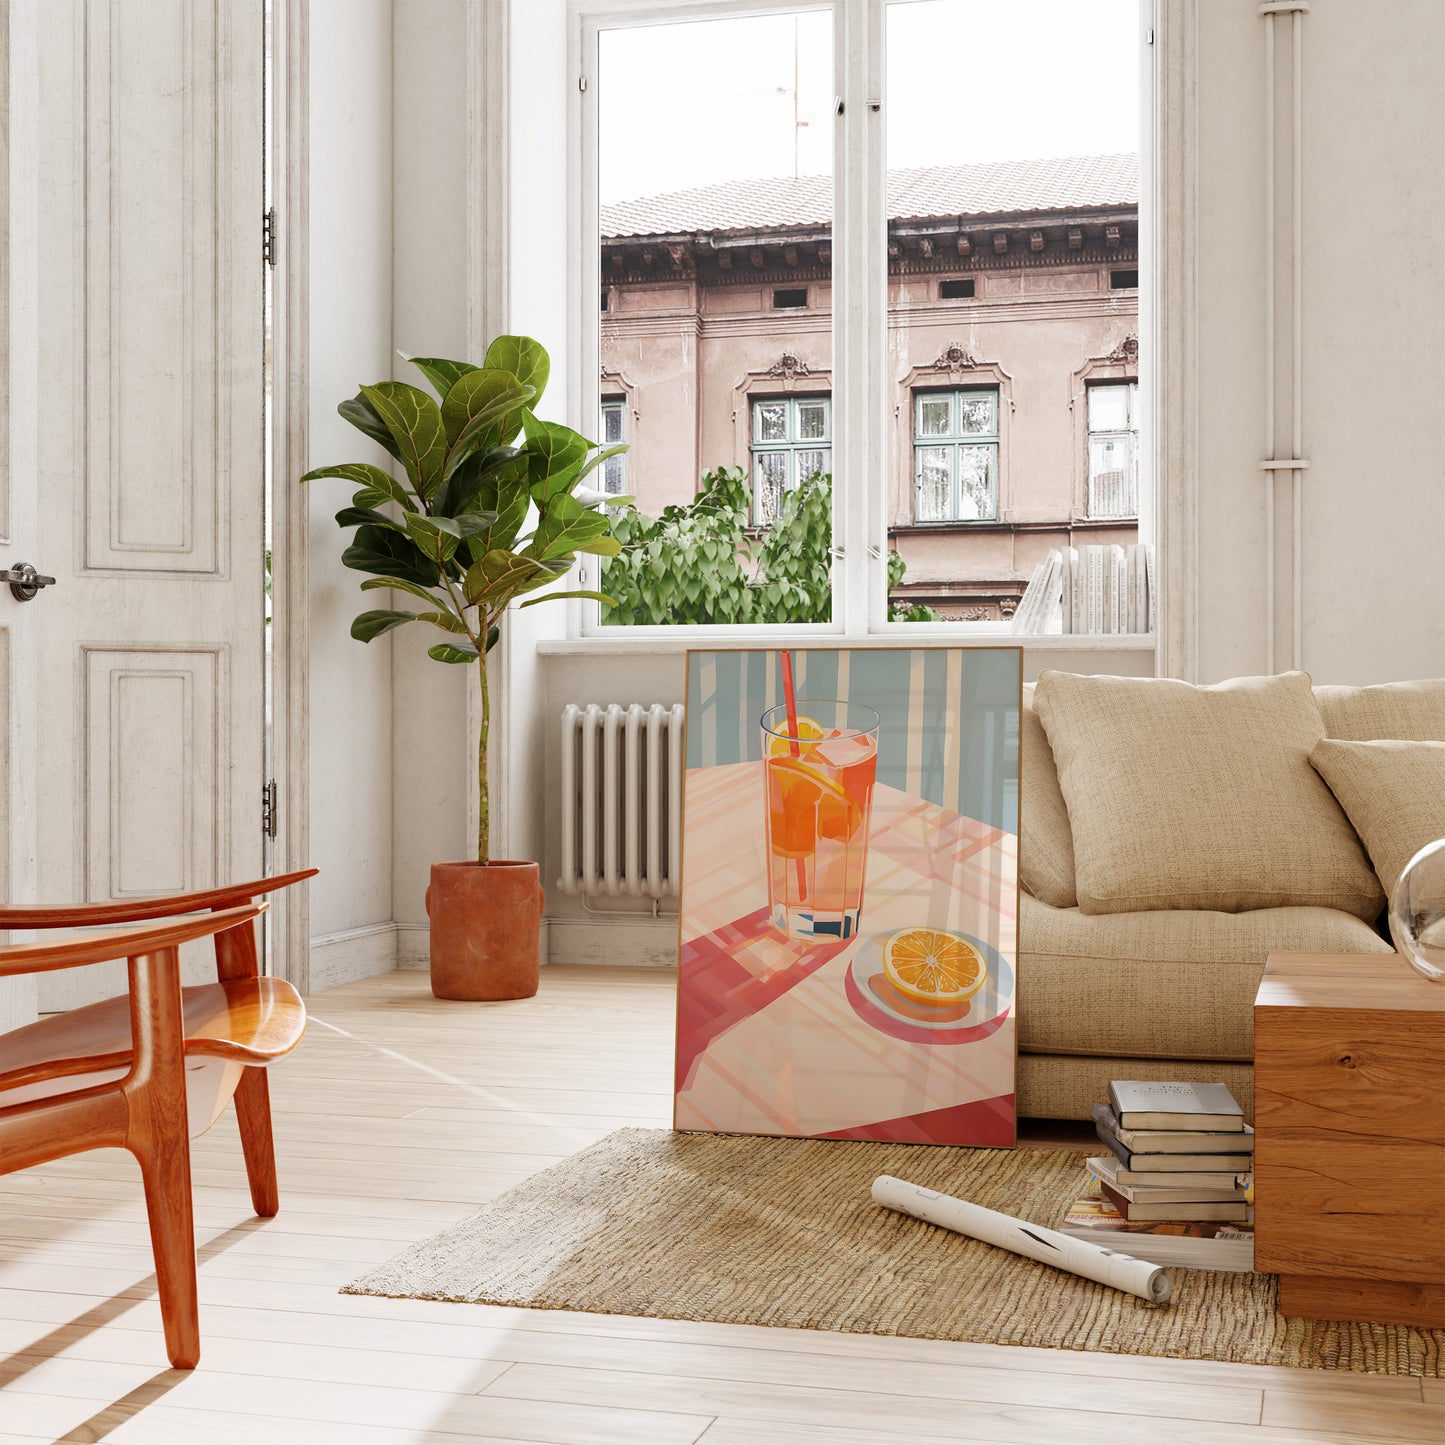 A bright living room with a plant, furniture, and a canvas print of a cocktail.